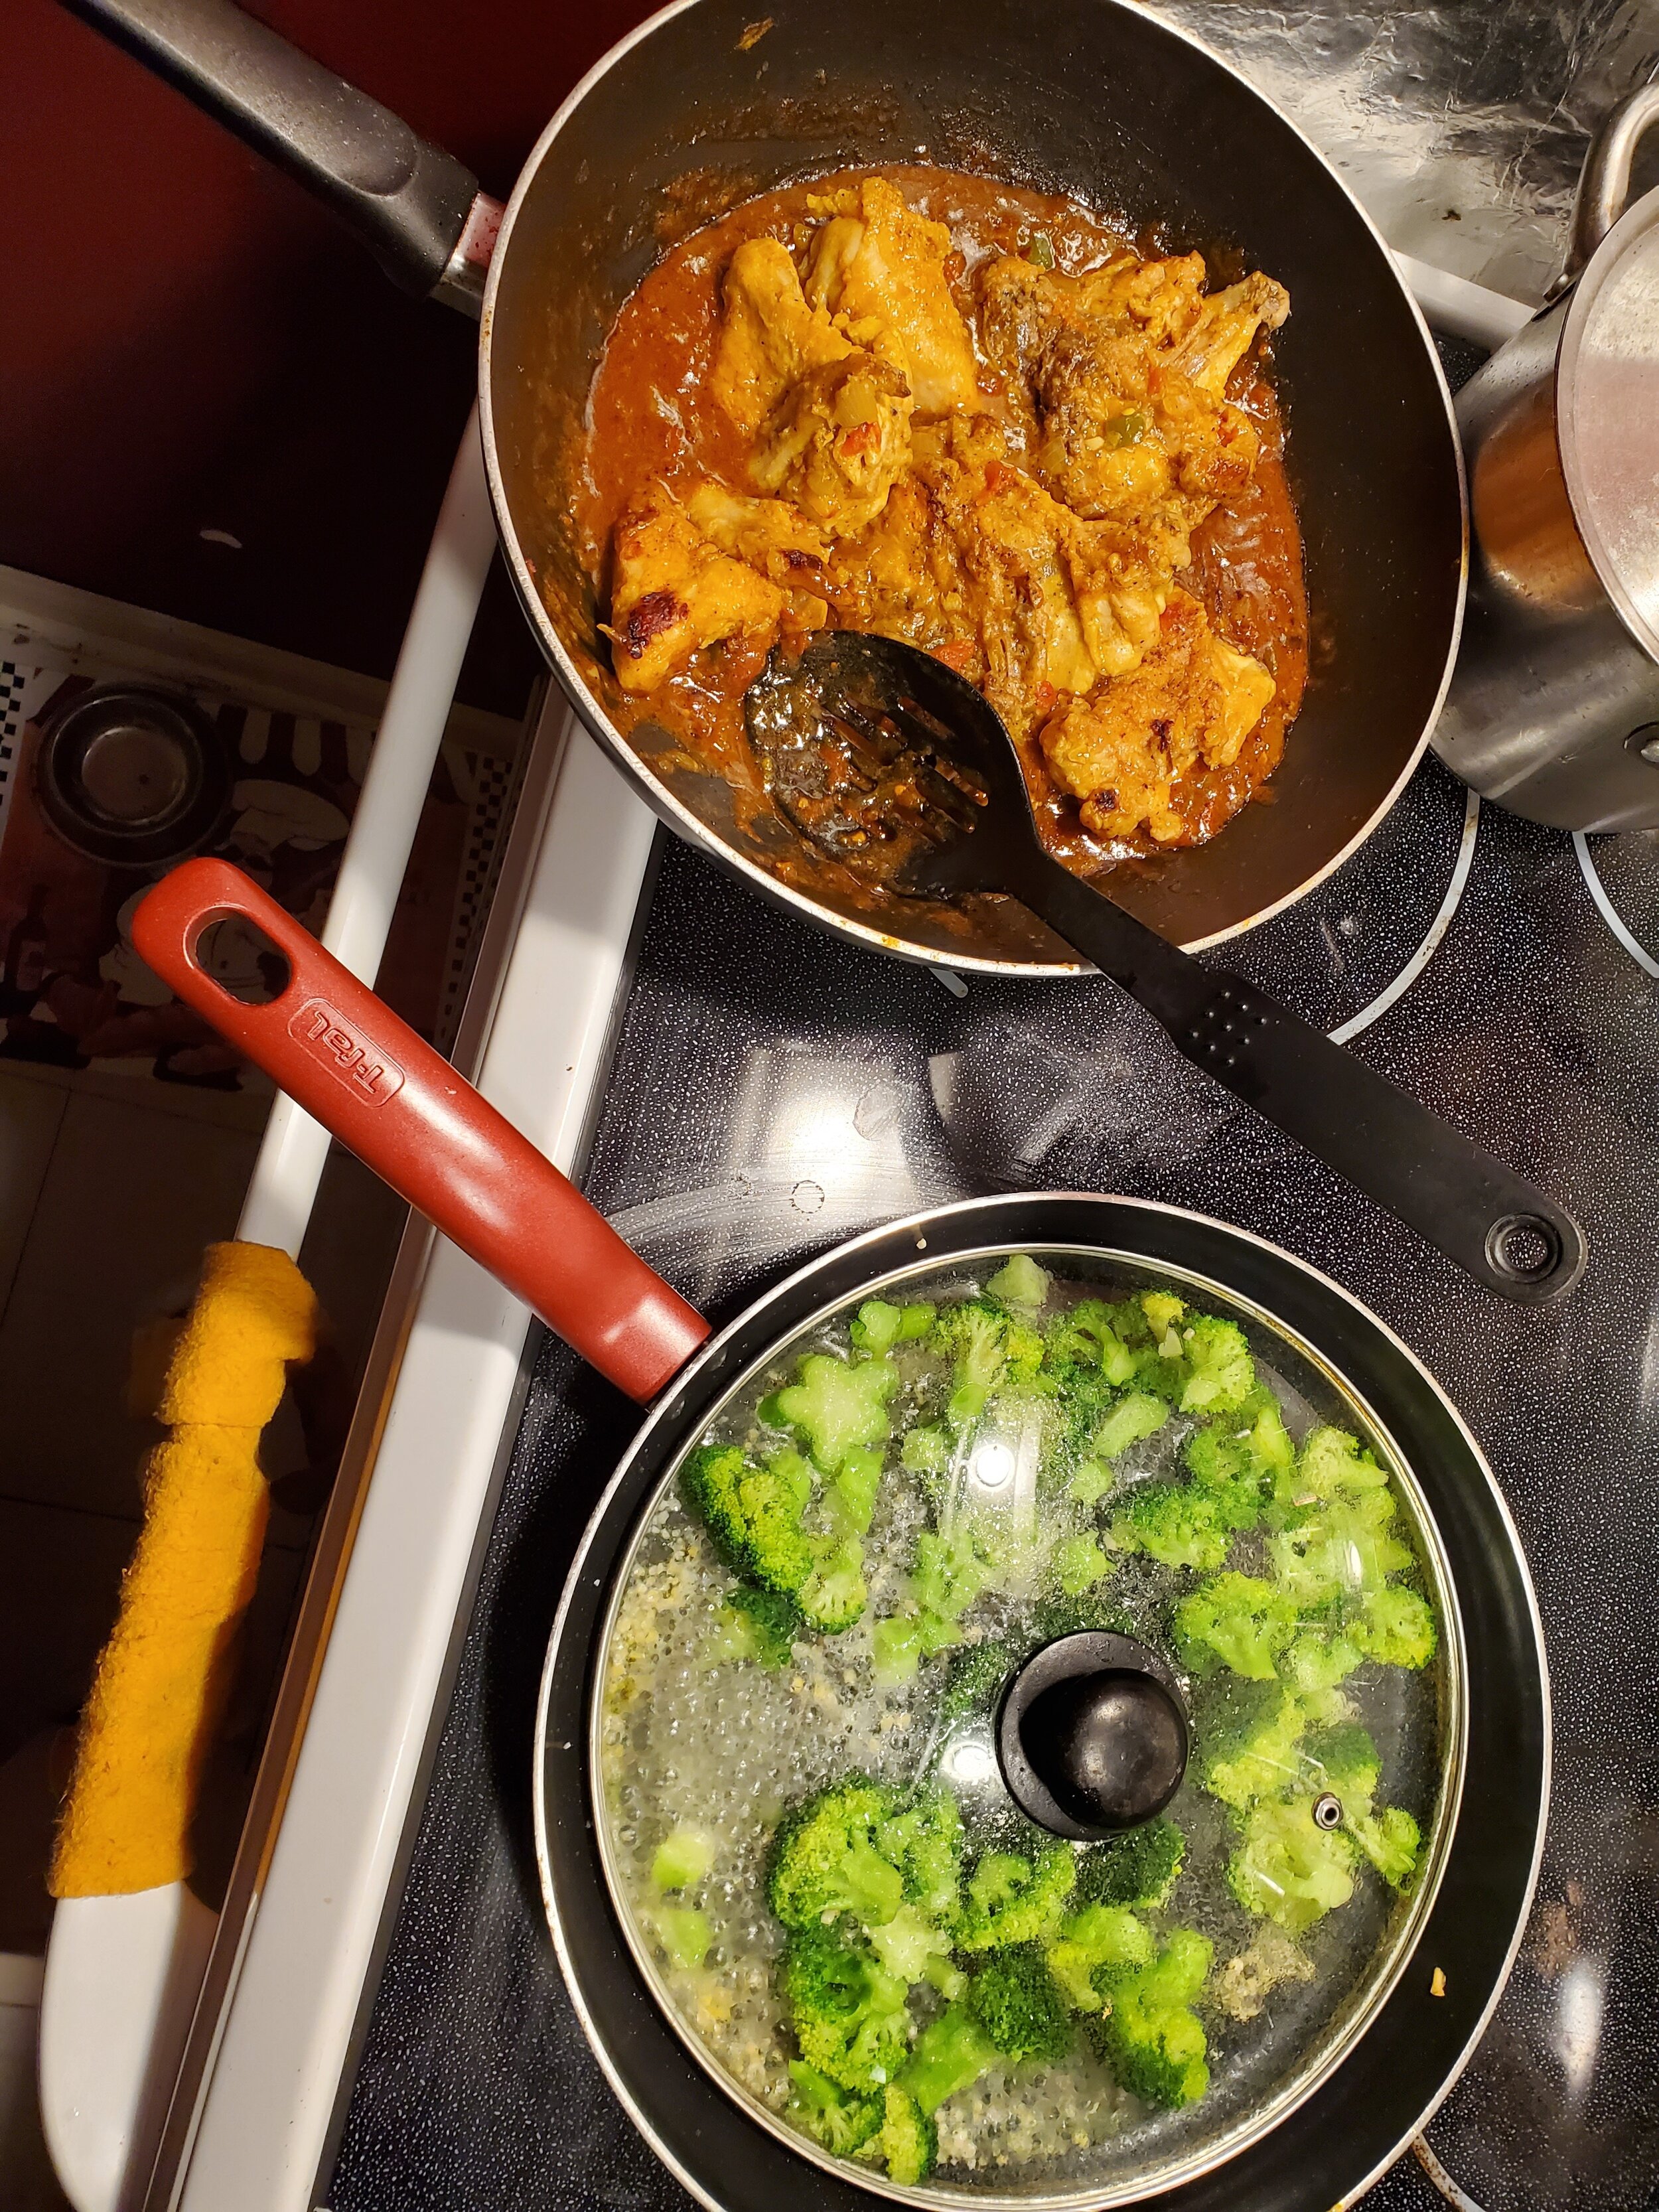 Dawn prepping her country braised chicken and browned broccoli  sess (2).jpg